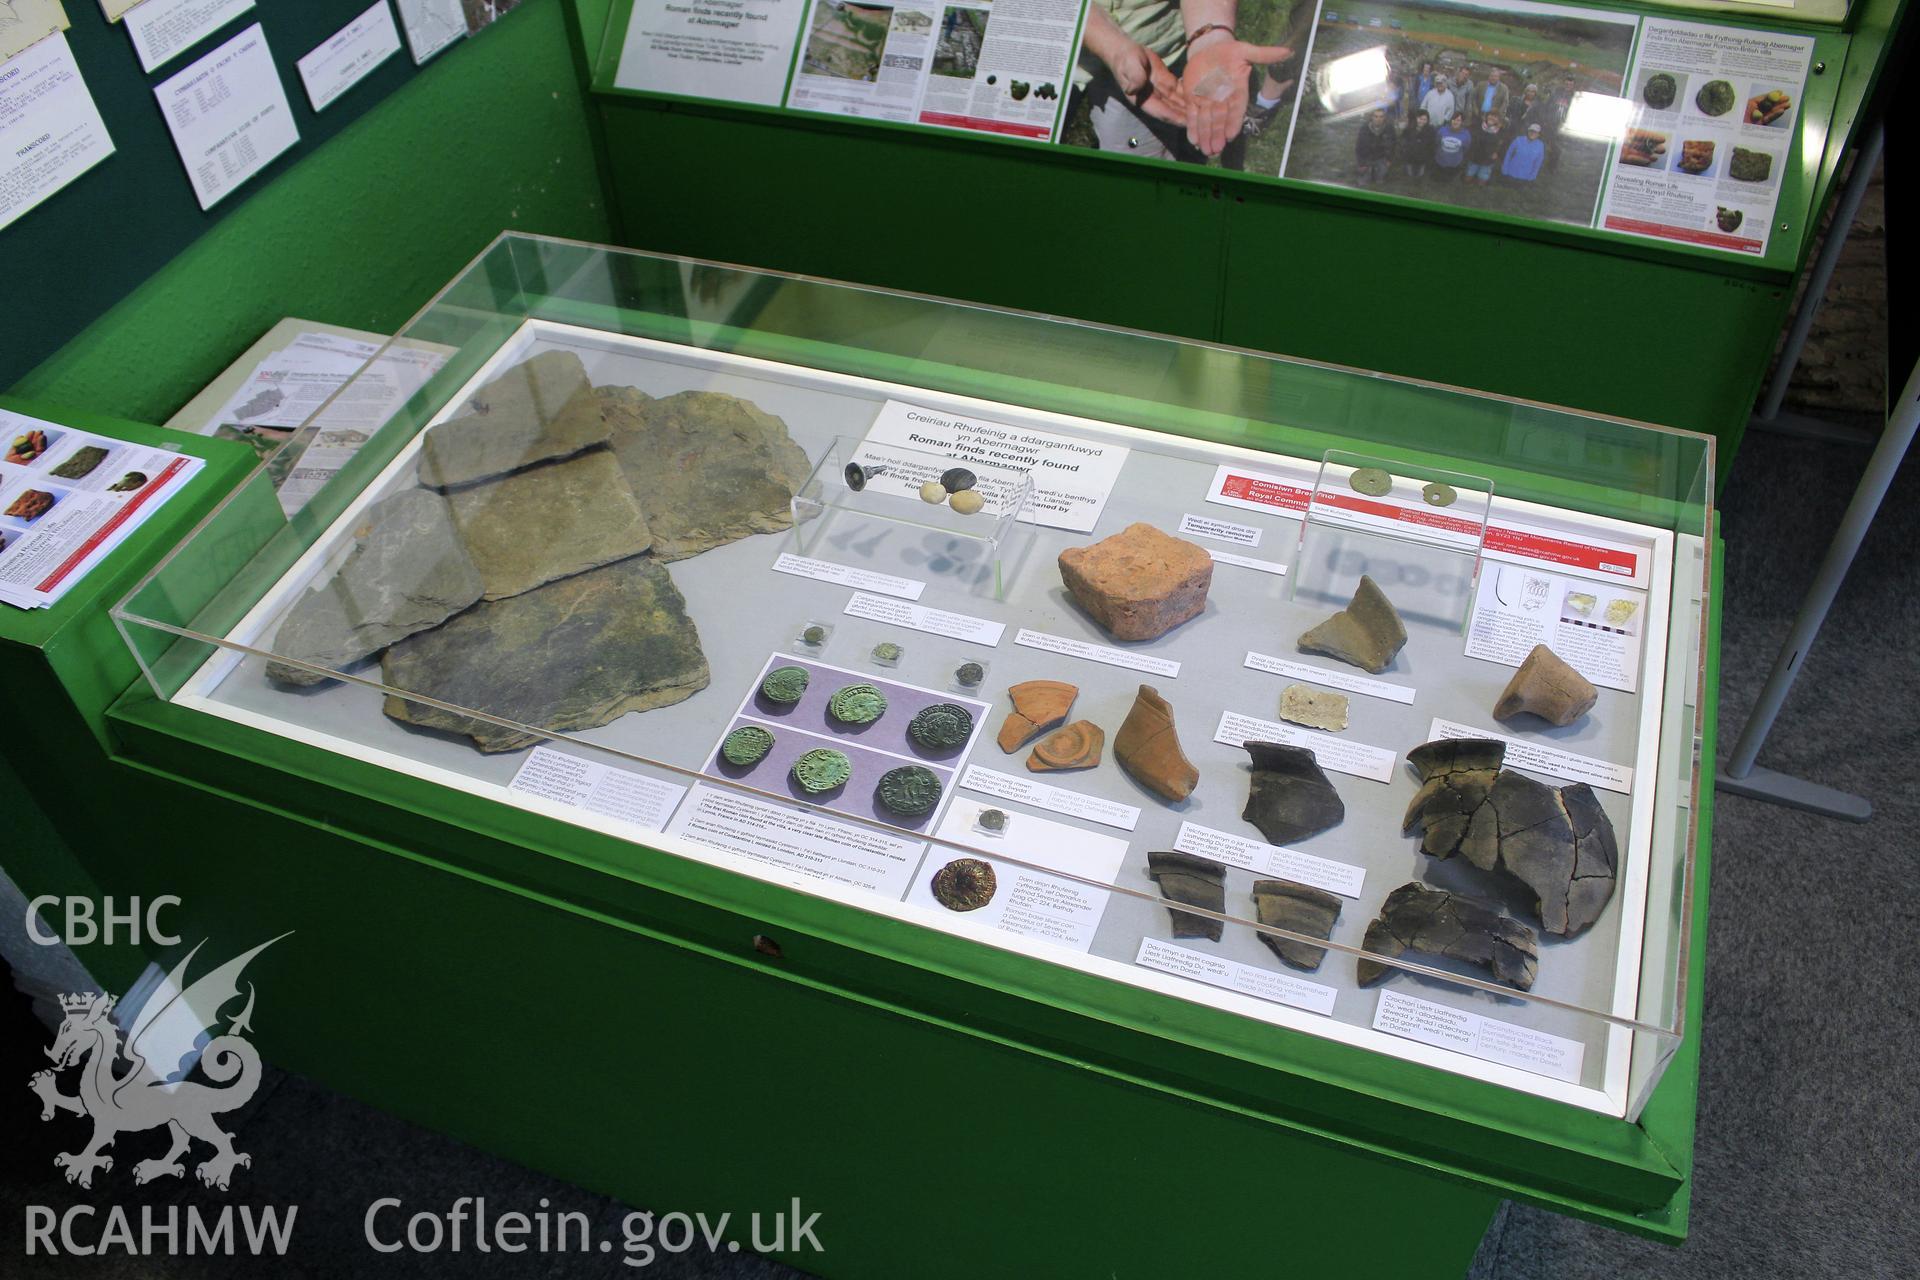 Photographs of new display of Roman finds from Abermagwr Roman Villa in Amgueddfa Ceredigion Museum, May 2015